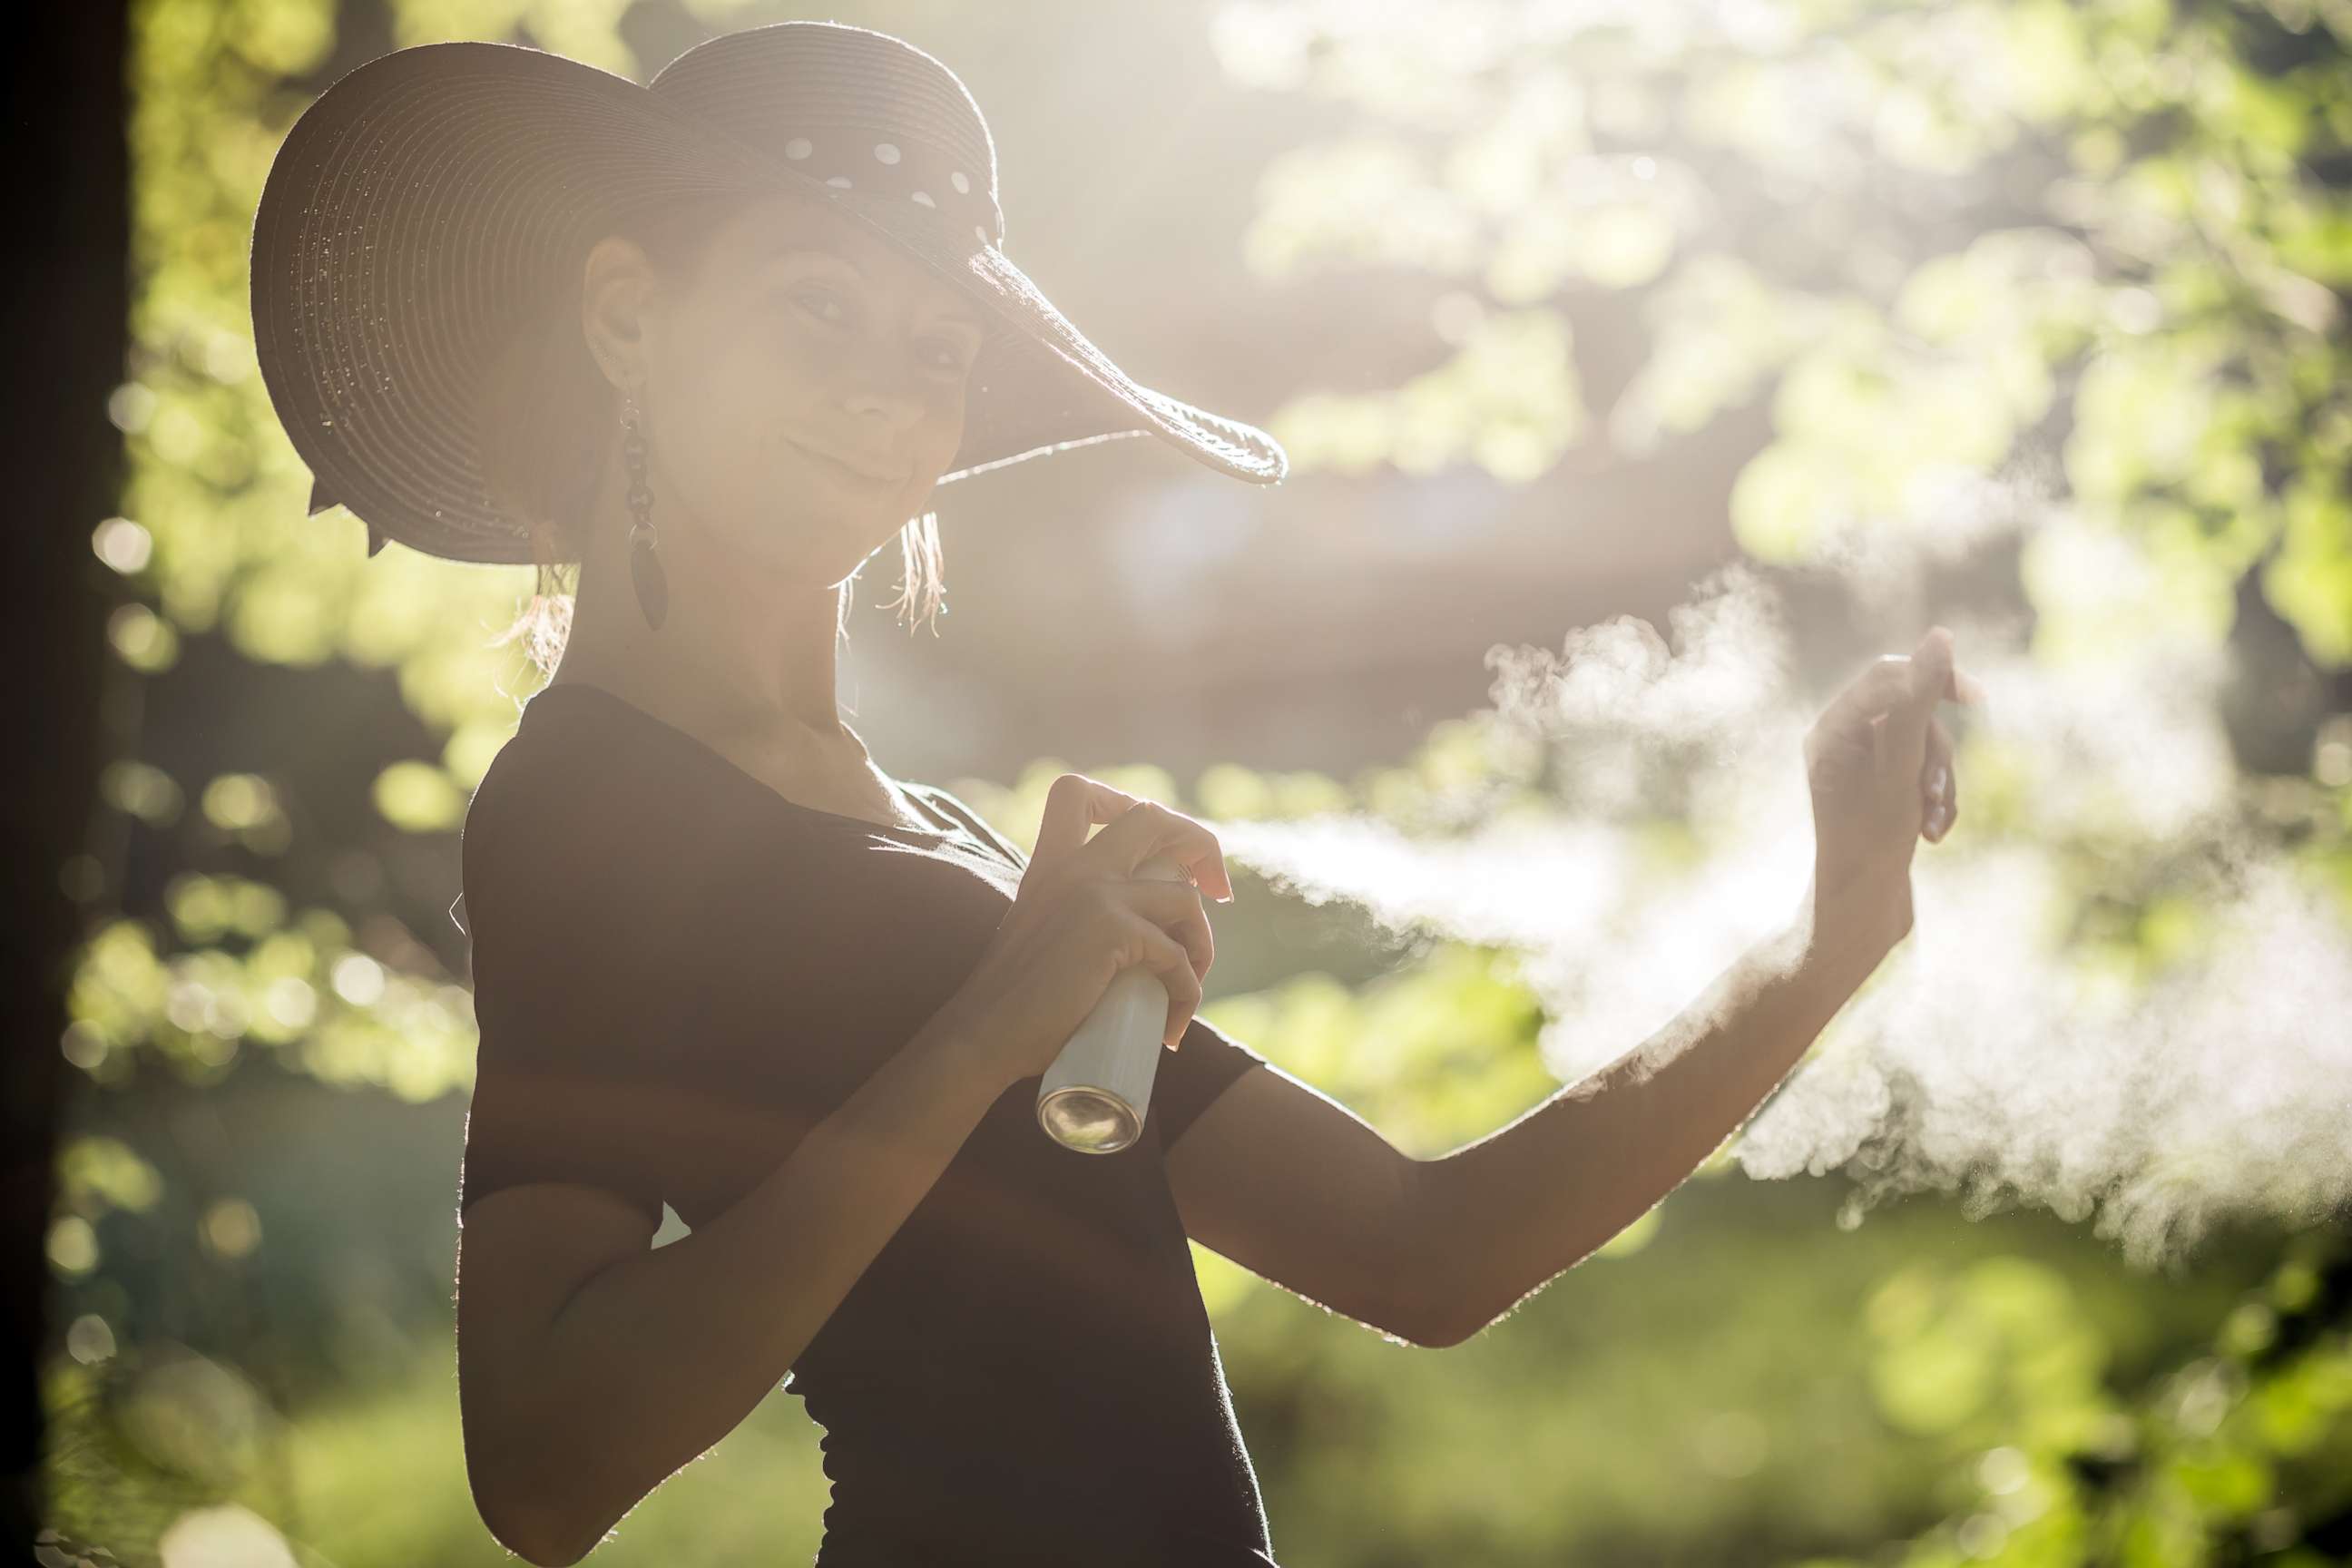 PHOTO: A woman sprays insect repellent on in this undated stock image.